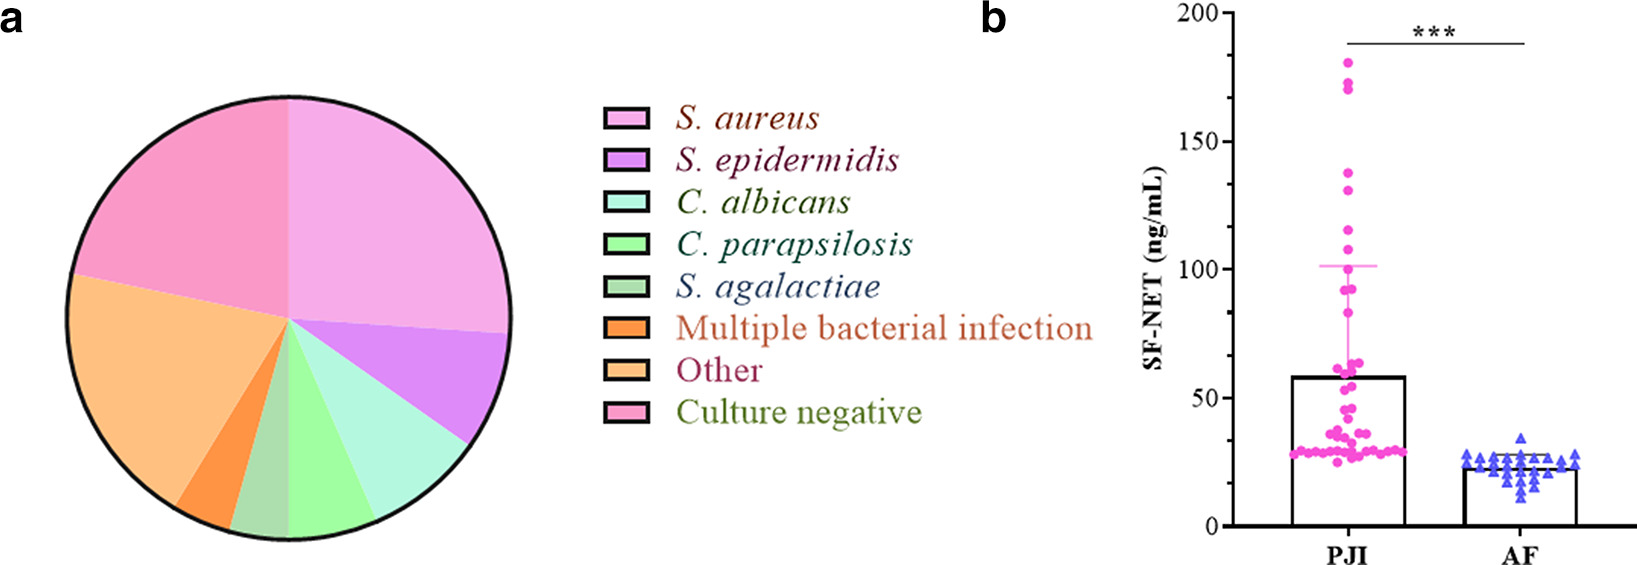 Fig. 1 
          a) The pathogenic microorganisms isolated for periprosthetic joint infection (PJI). S. aureus, Staphylococcus aureus; S. epidermidis, Staphylococcus epidermidis; C. albicans, Candida albicans; C. parapsilosis, Candida parapsilosis; S. agalactide, Streptococcus agalactiae. b) The levels of synovial fluid neutrophil extracellular traps (SF-NET) in PJI and aseptic failure (AF) patients. ***p < 0.001, Mann-Whitney U test.
        